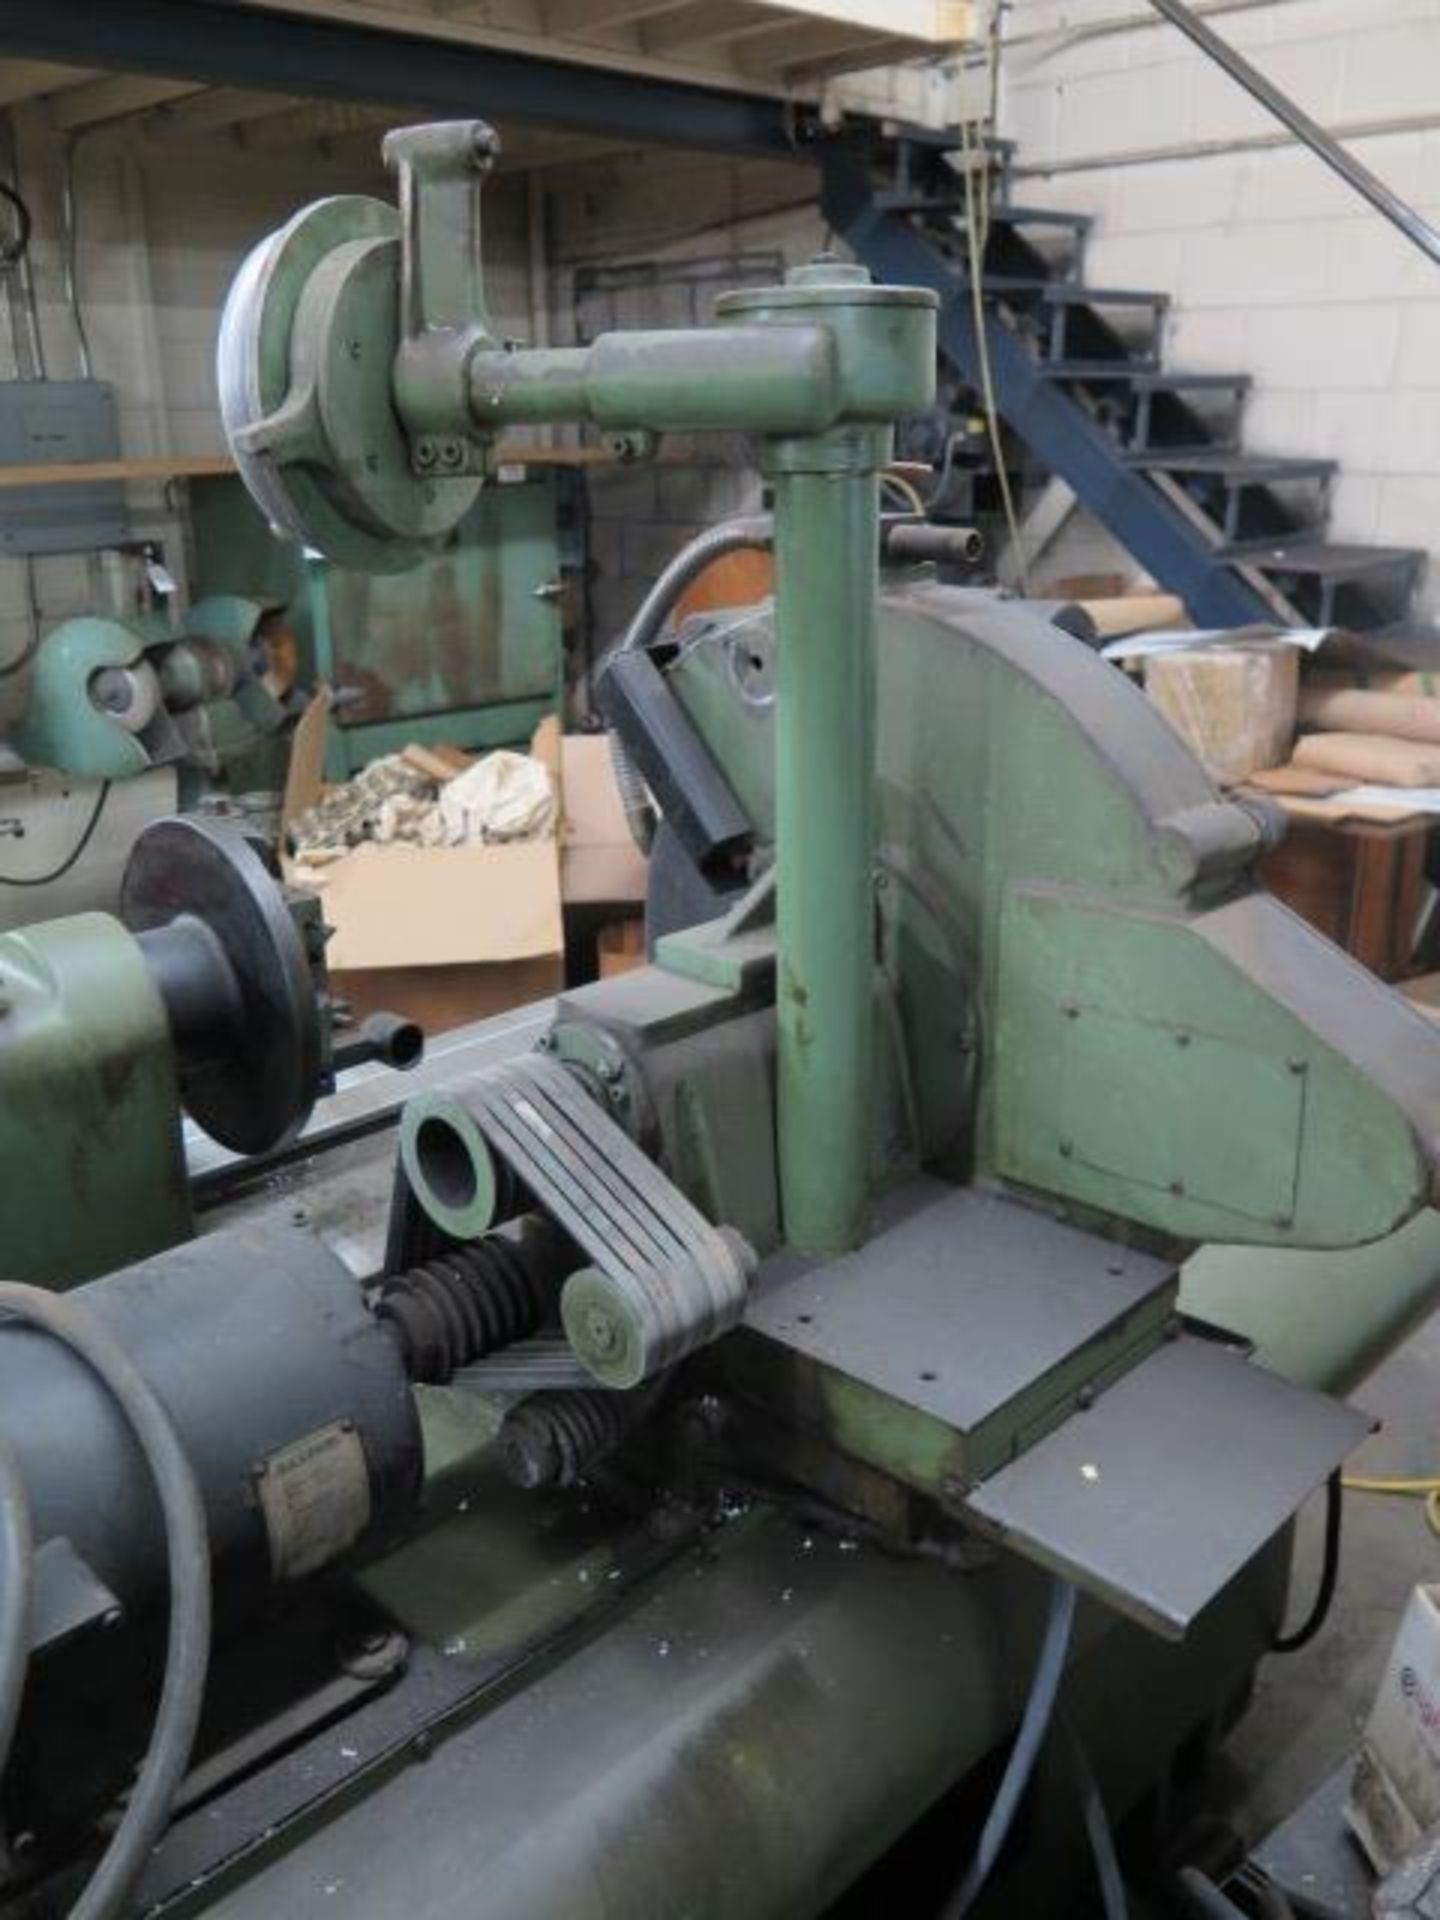 Storm Vulcan mdl. 15 Cam Shaft Grinder s/n 800-76 w/ Motorized Work Head, Tailstock, SOLD AS IS - Image 12 of 16